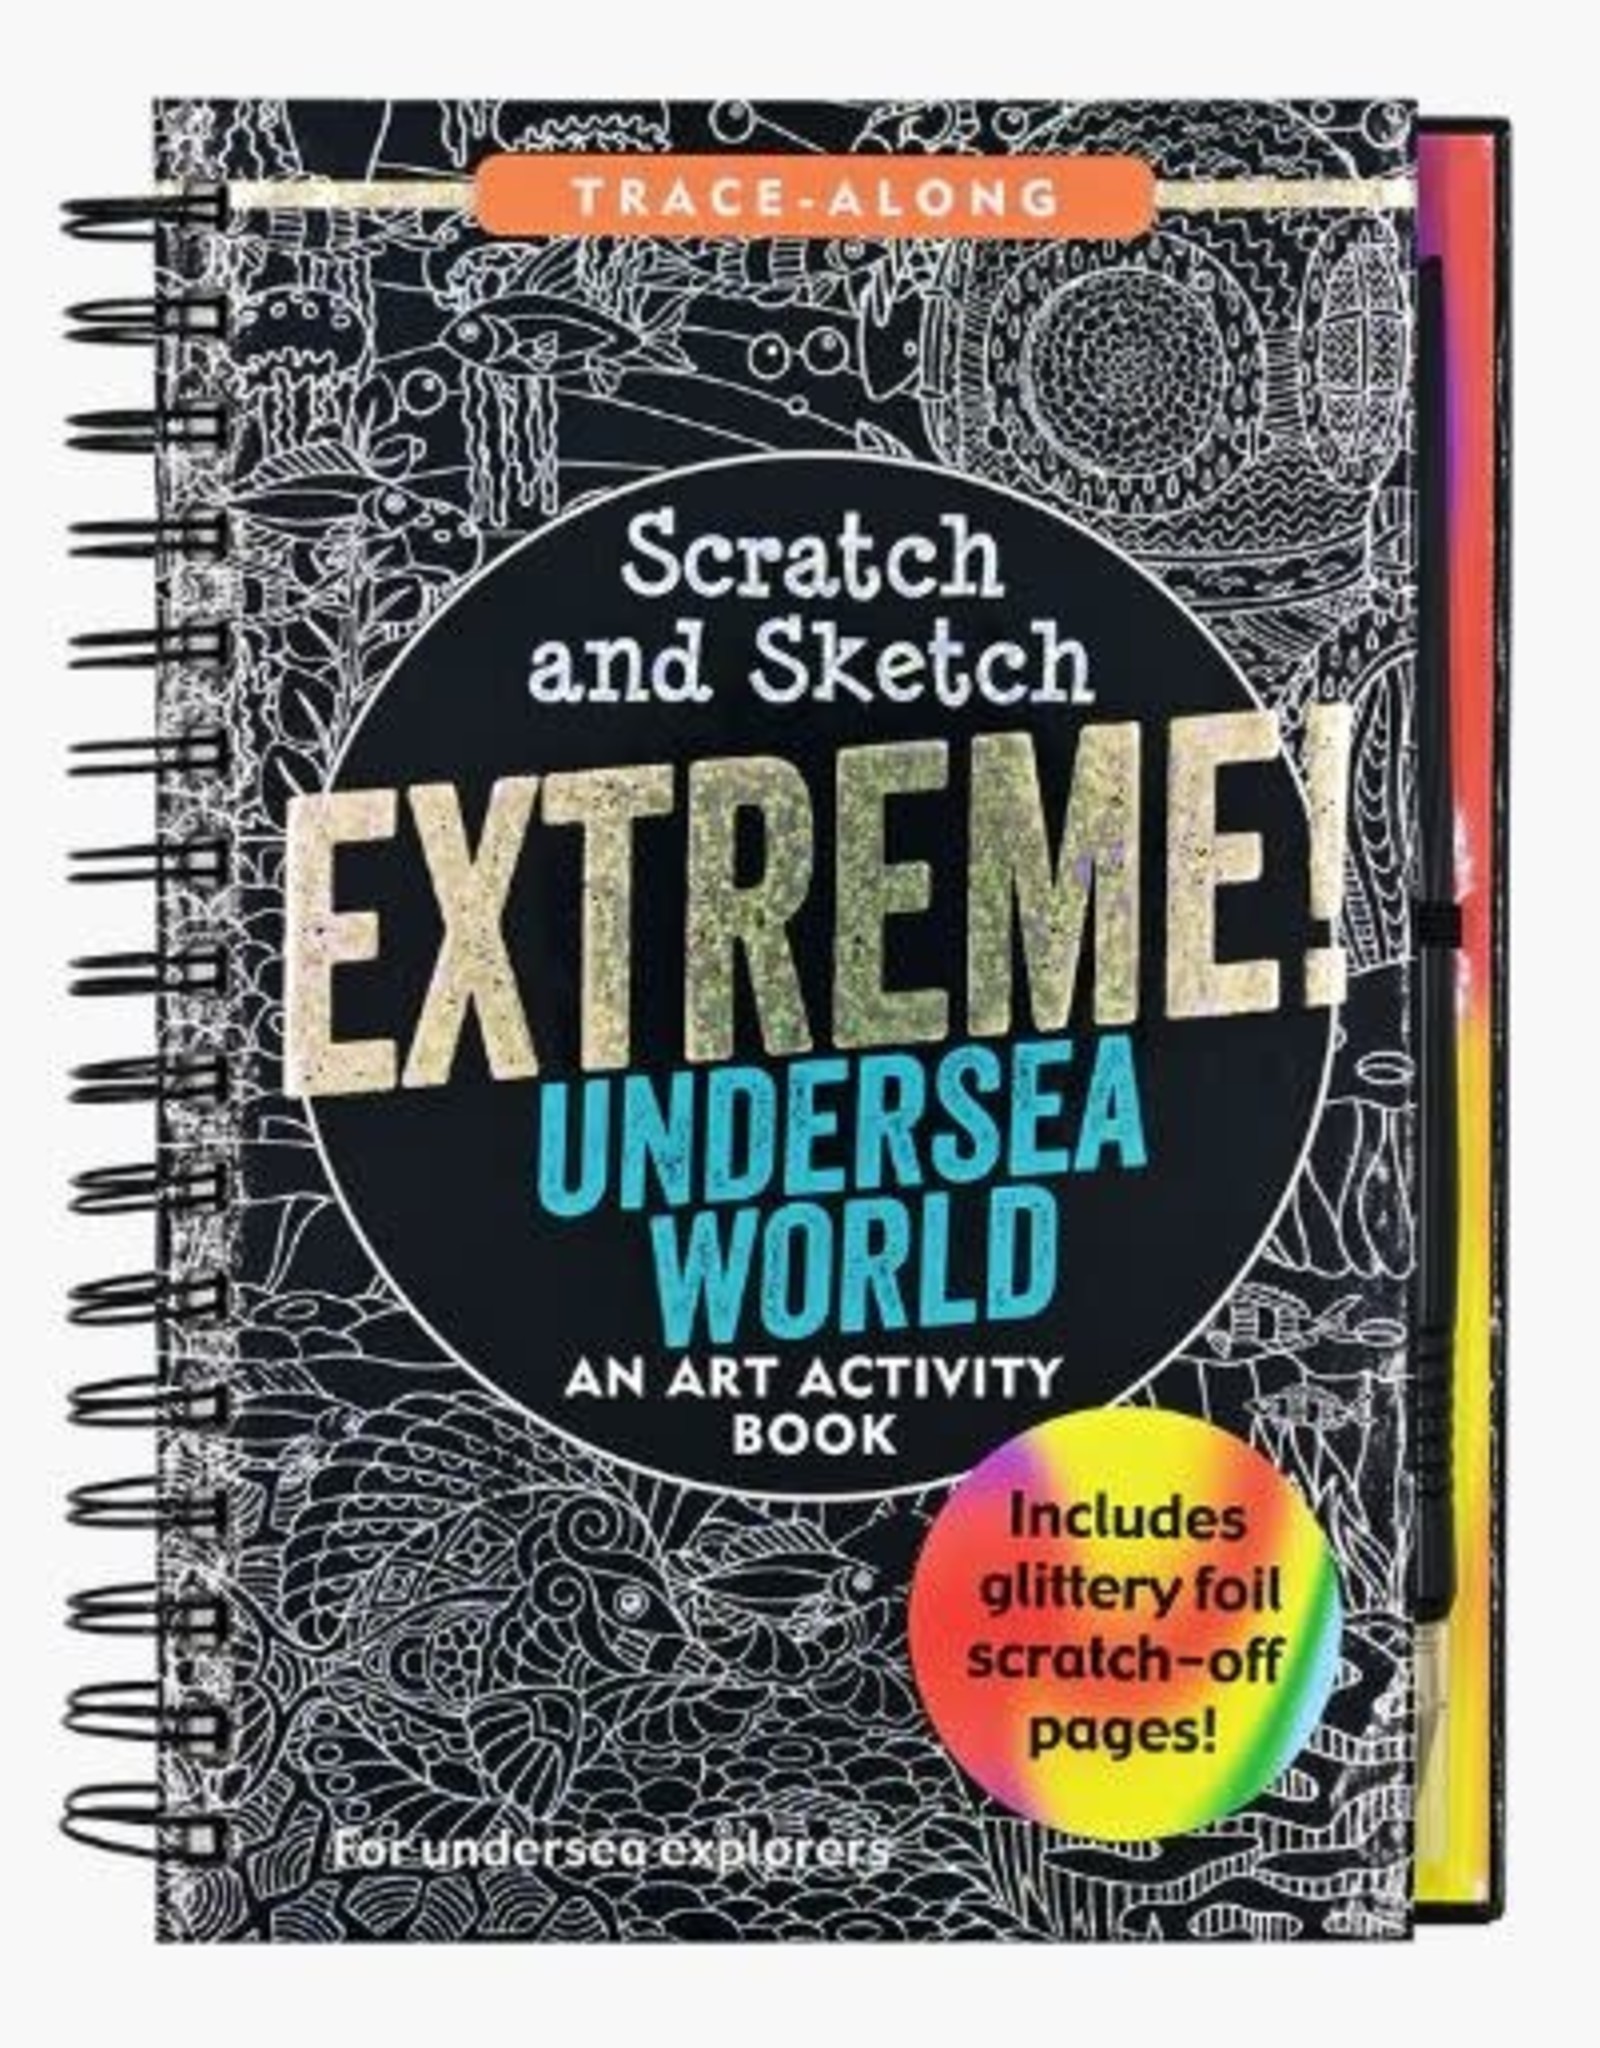 Peter Pauper Press EXTREME UNDERSEA WORLD SCRATCH AND SKETCH